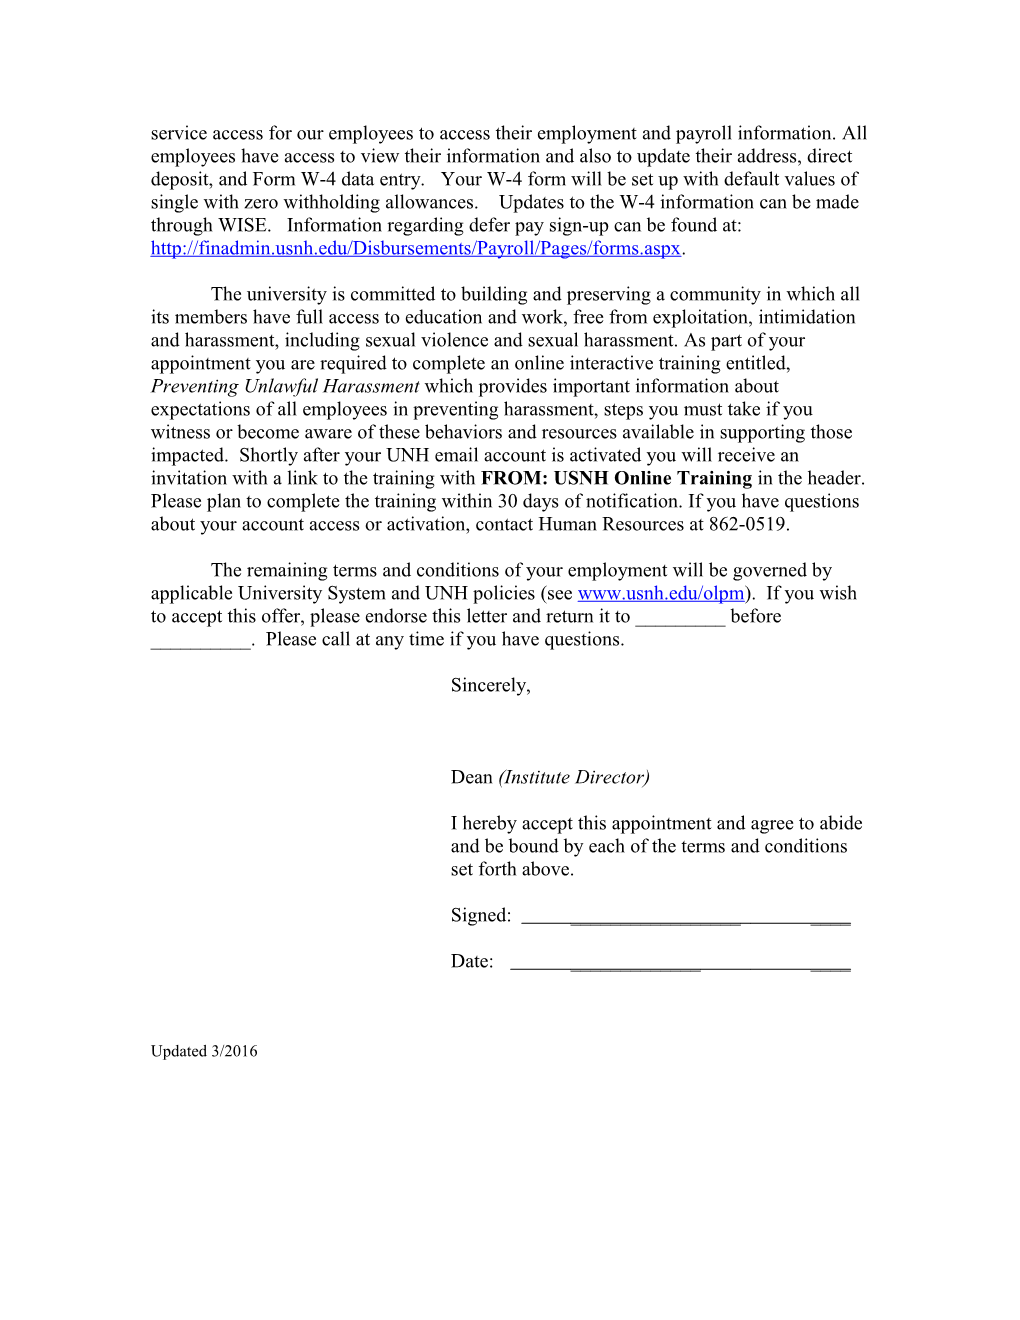 Draft Letter for Tenured/Tenure-Track Faculty on External Funding